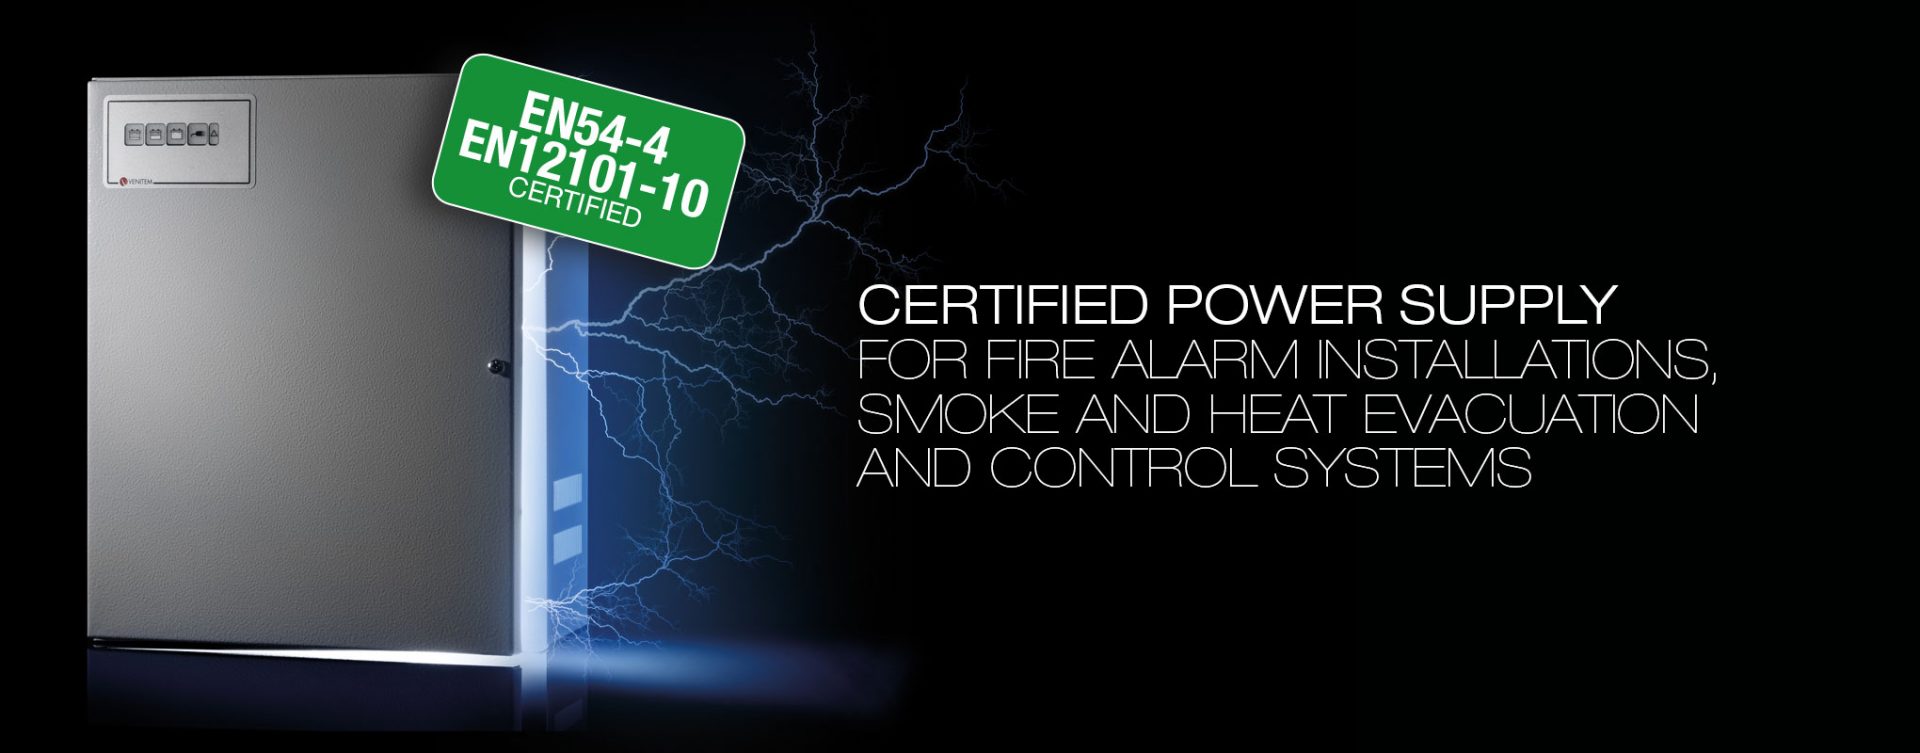 Fire alarm installations, smoke and heat evacuation and control systems